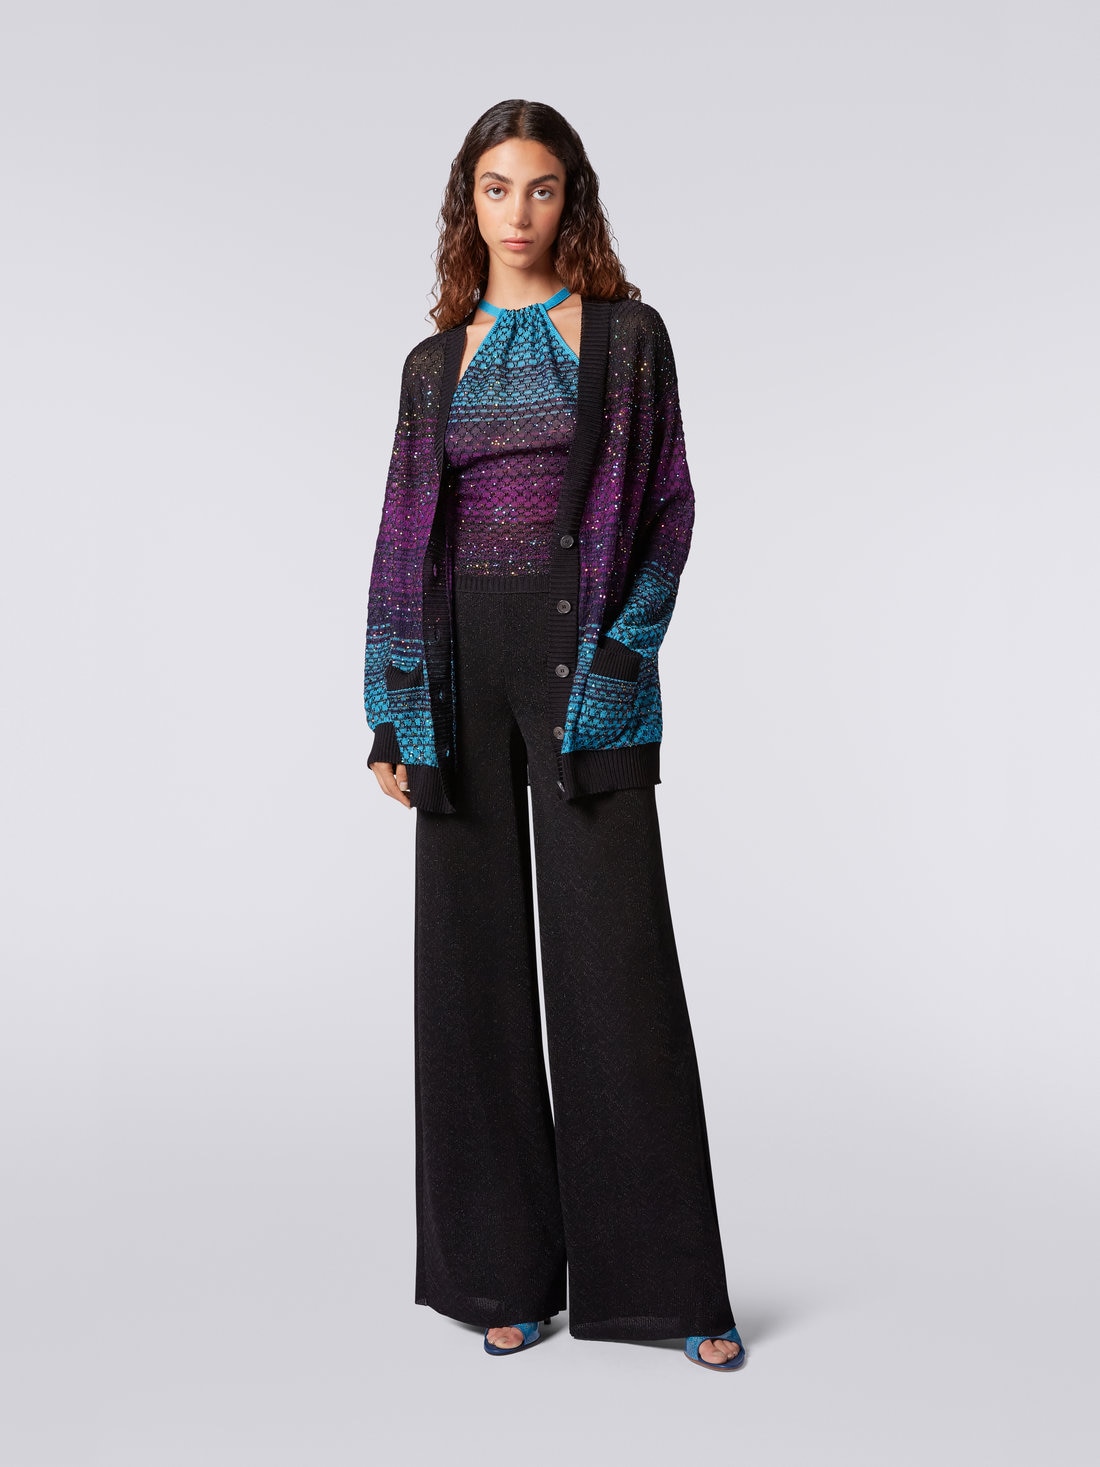 Oversized loose-knit cardigan with sequins, Turquoise, Purple & Black - DS23SM0ZBK022ISM8NJ - 1